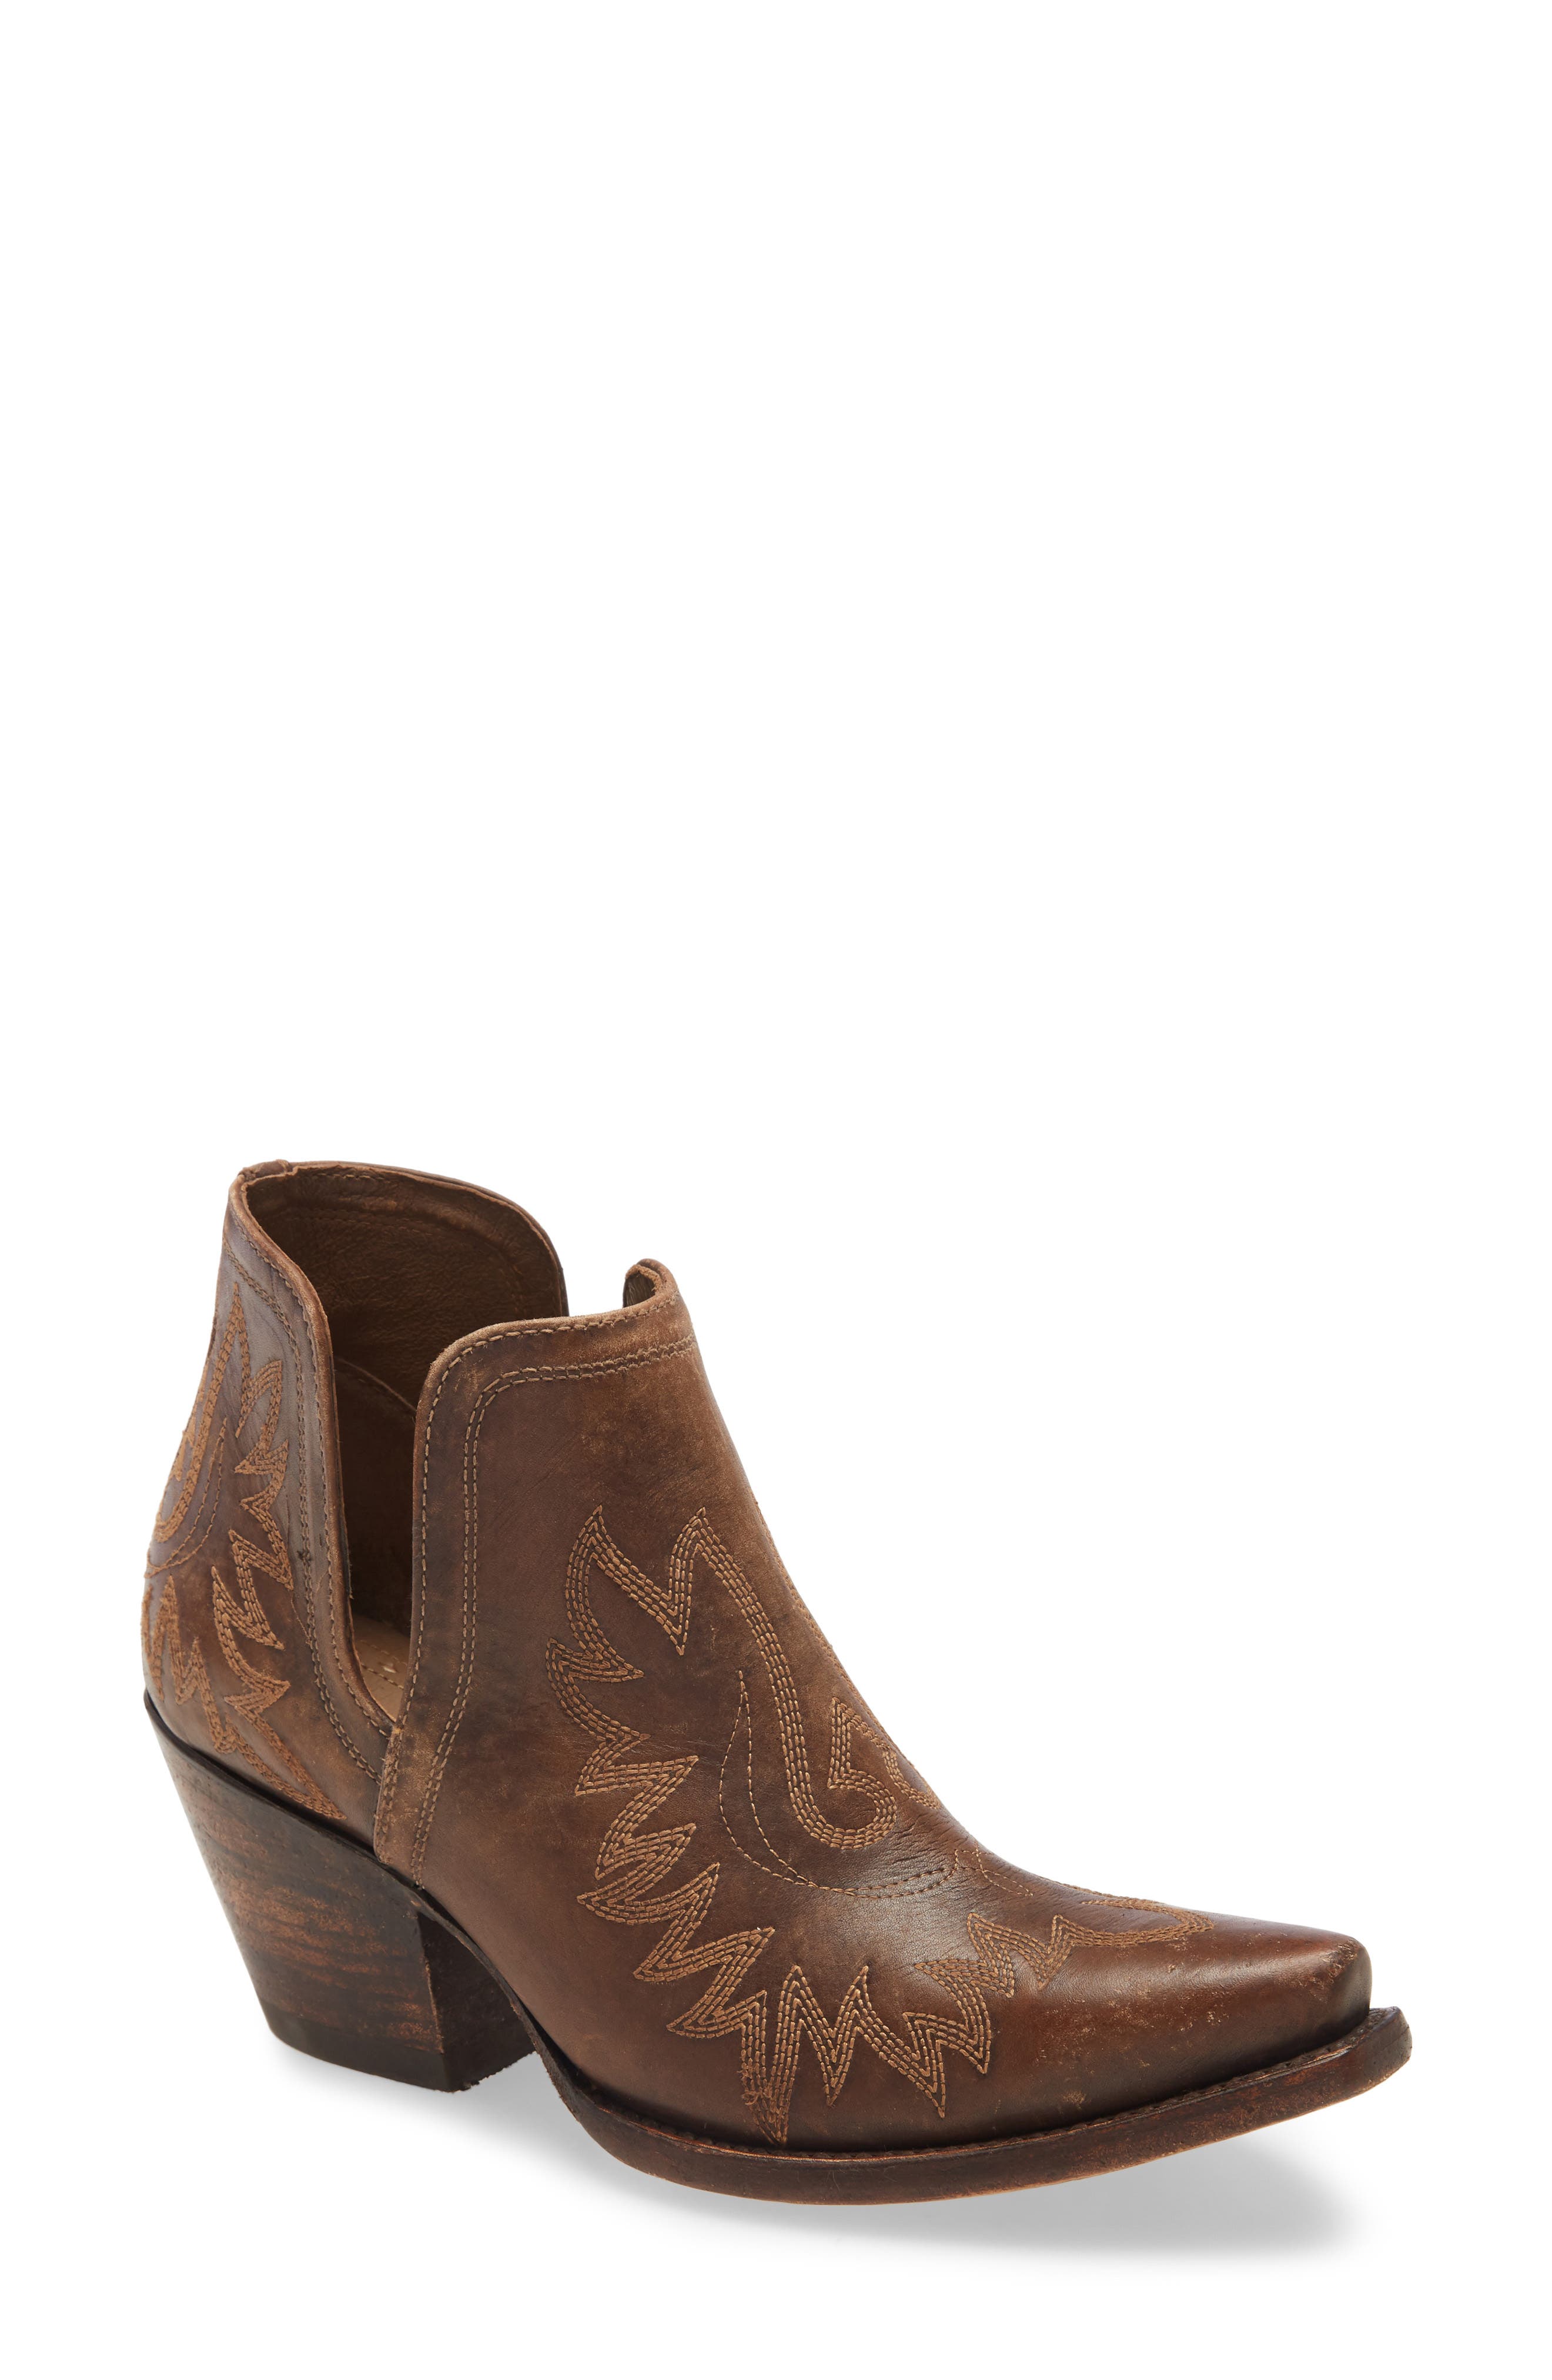 ariat stax studded wedge bootie